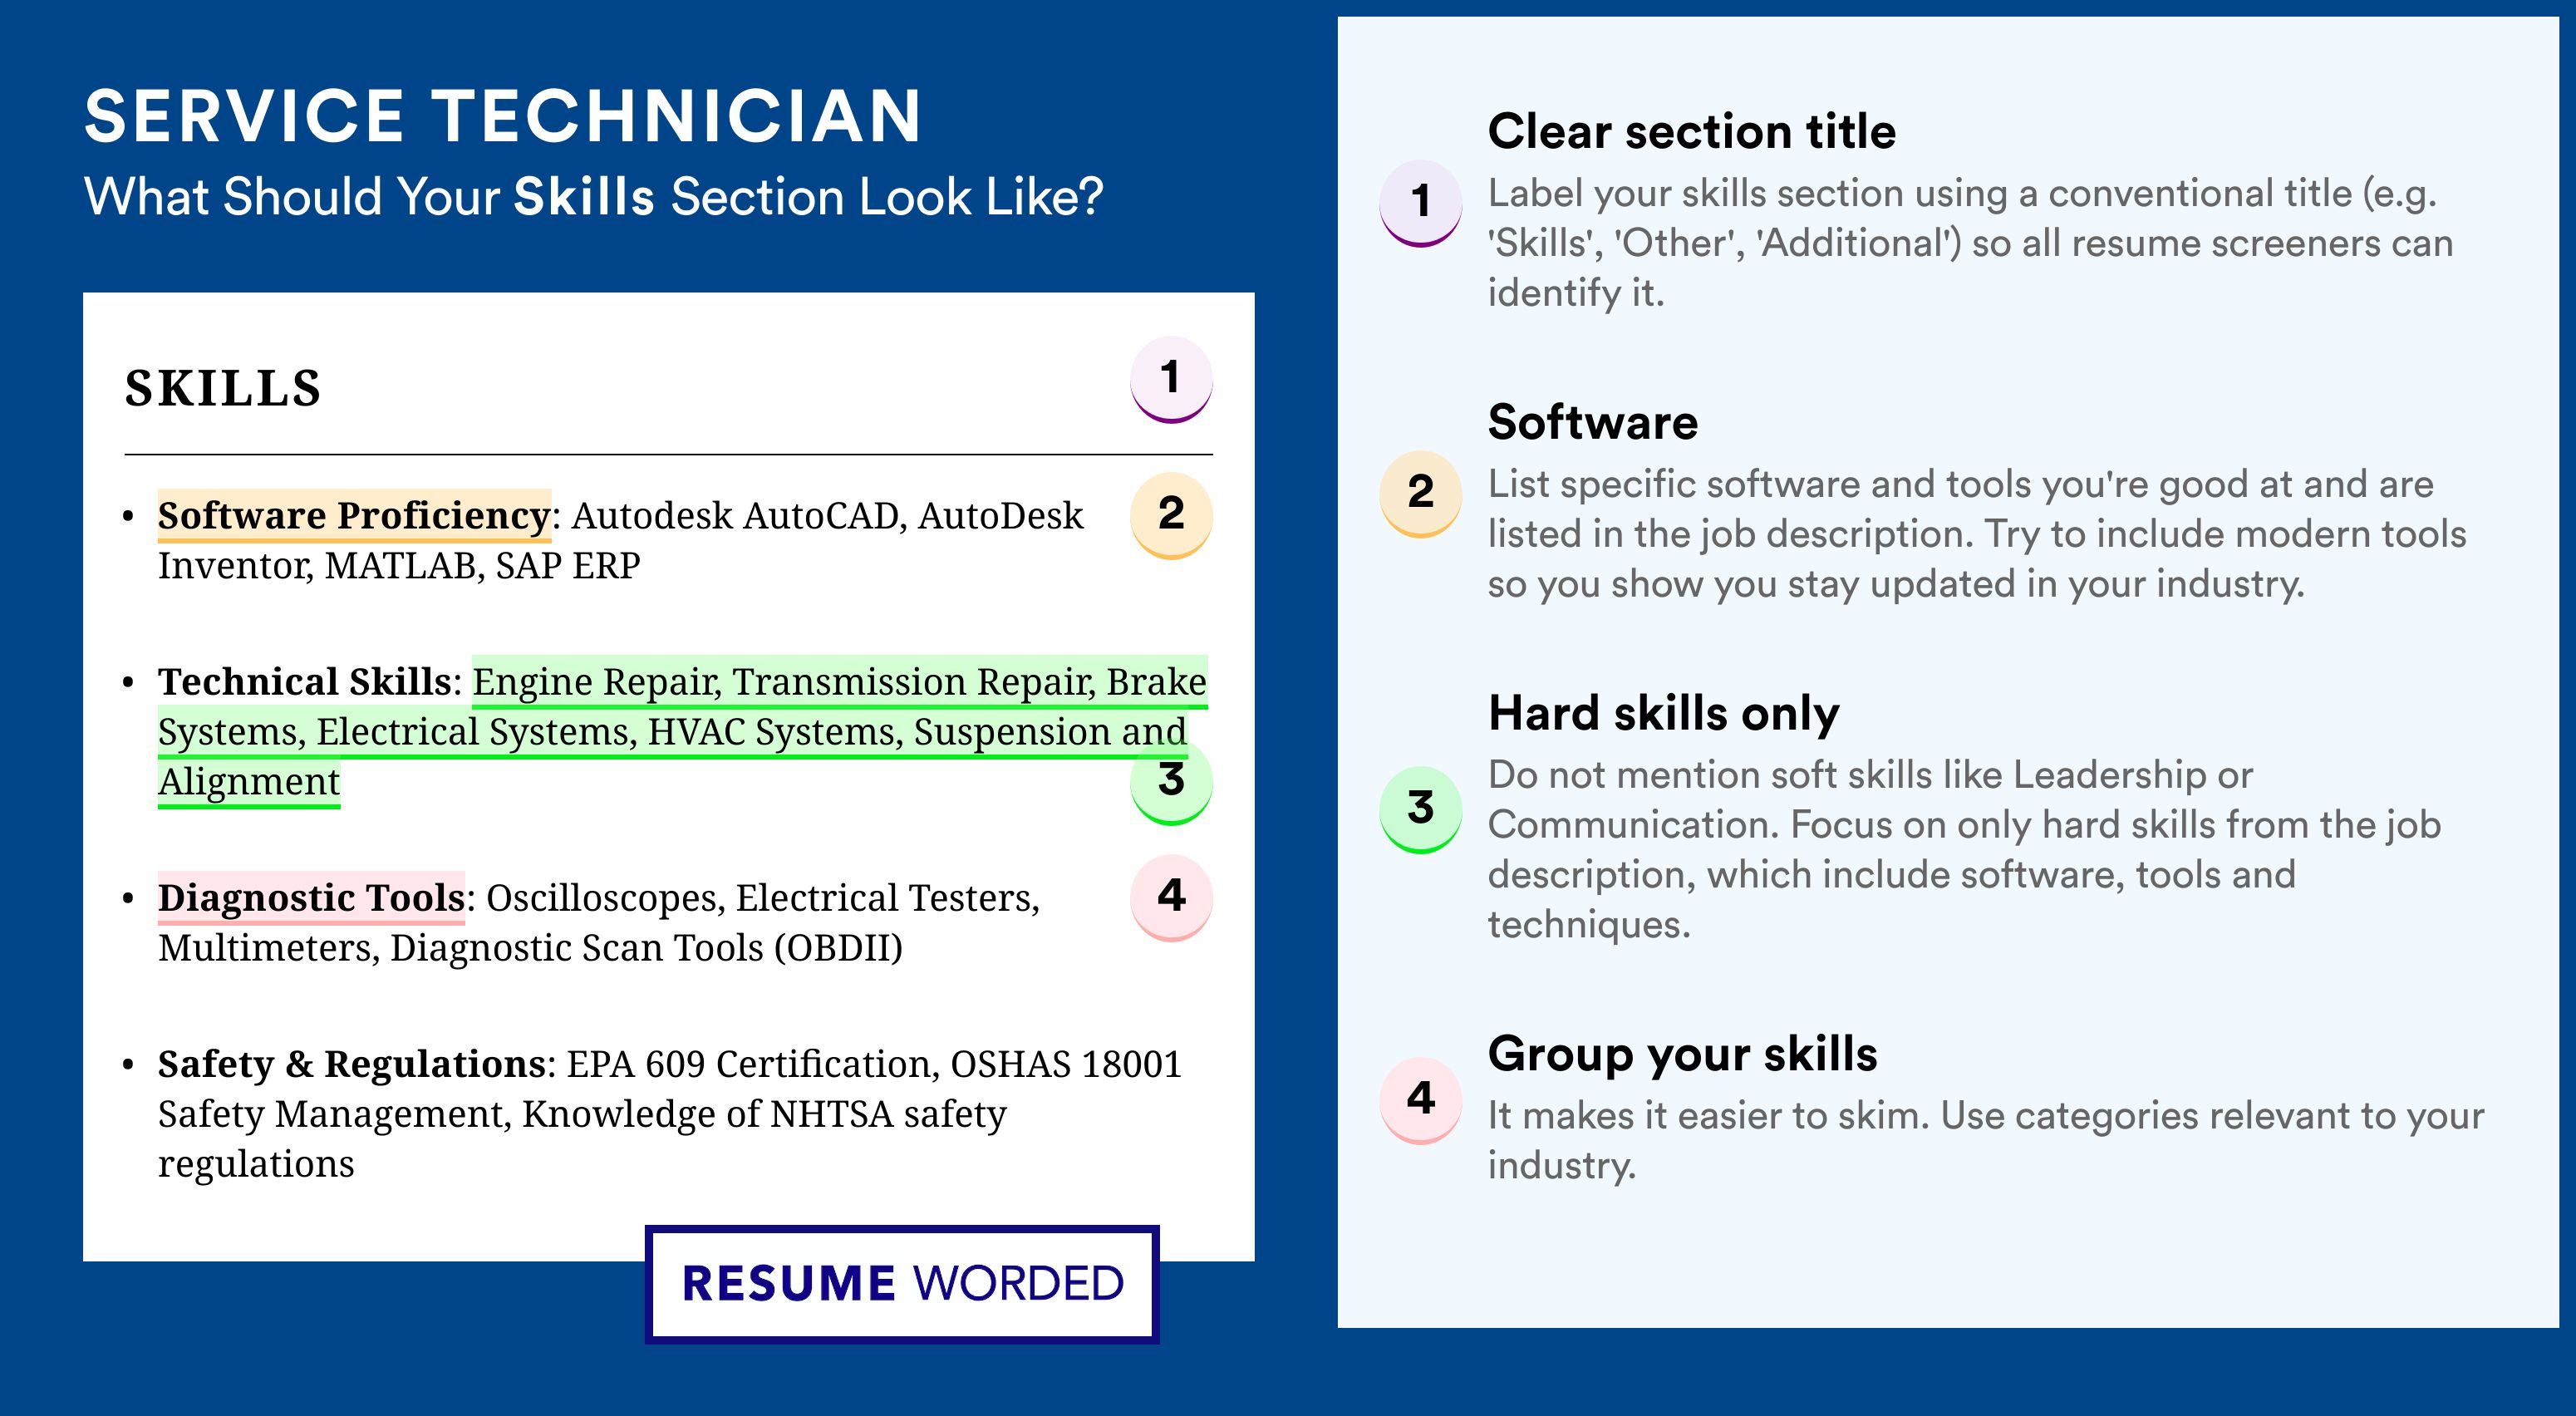 How To Write Your Skills Section - Service Technician Roles